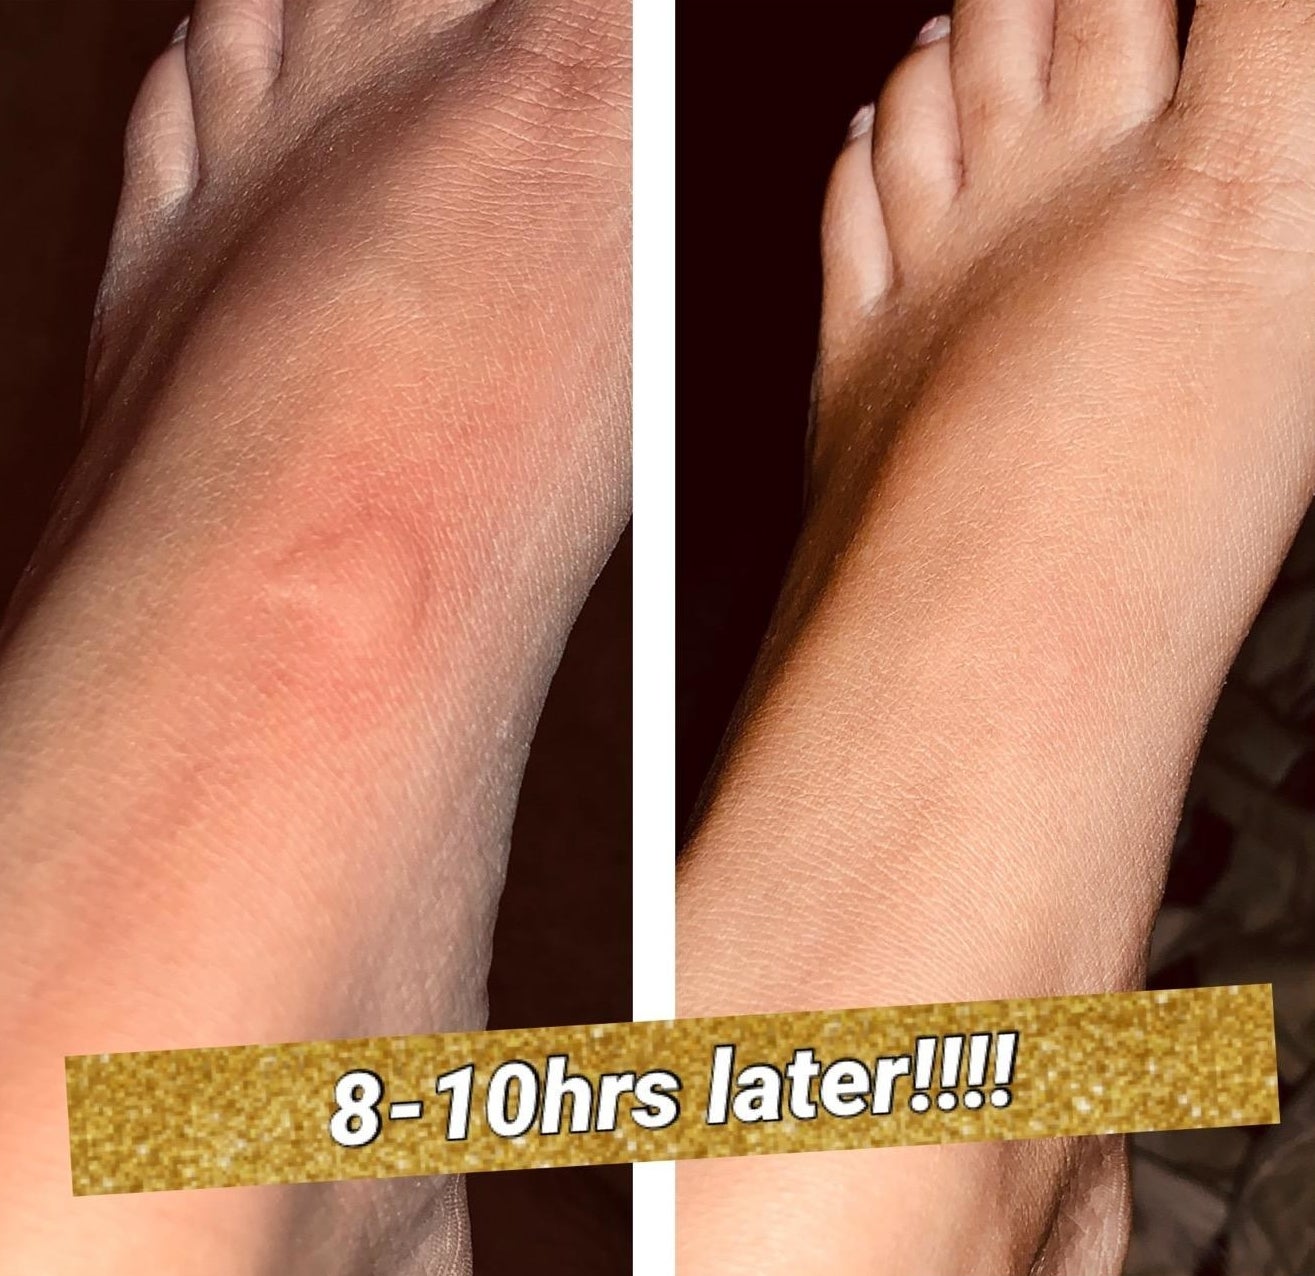 A before and after reviewer photo of a bug bite on a foot